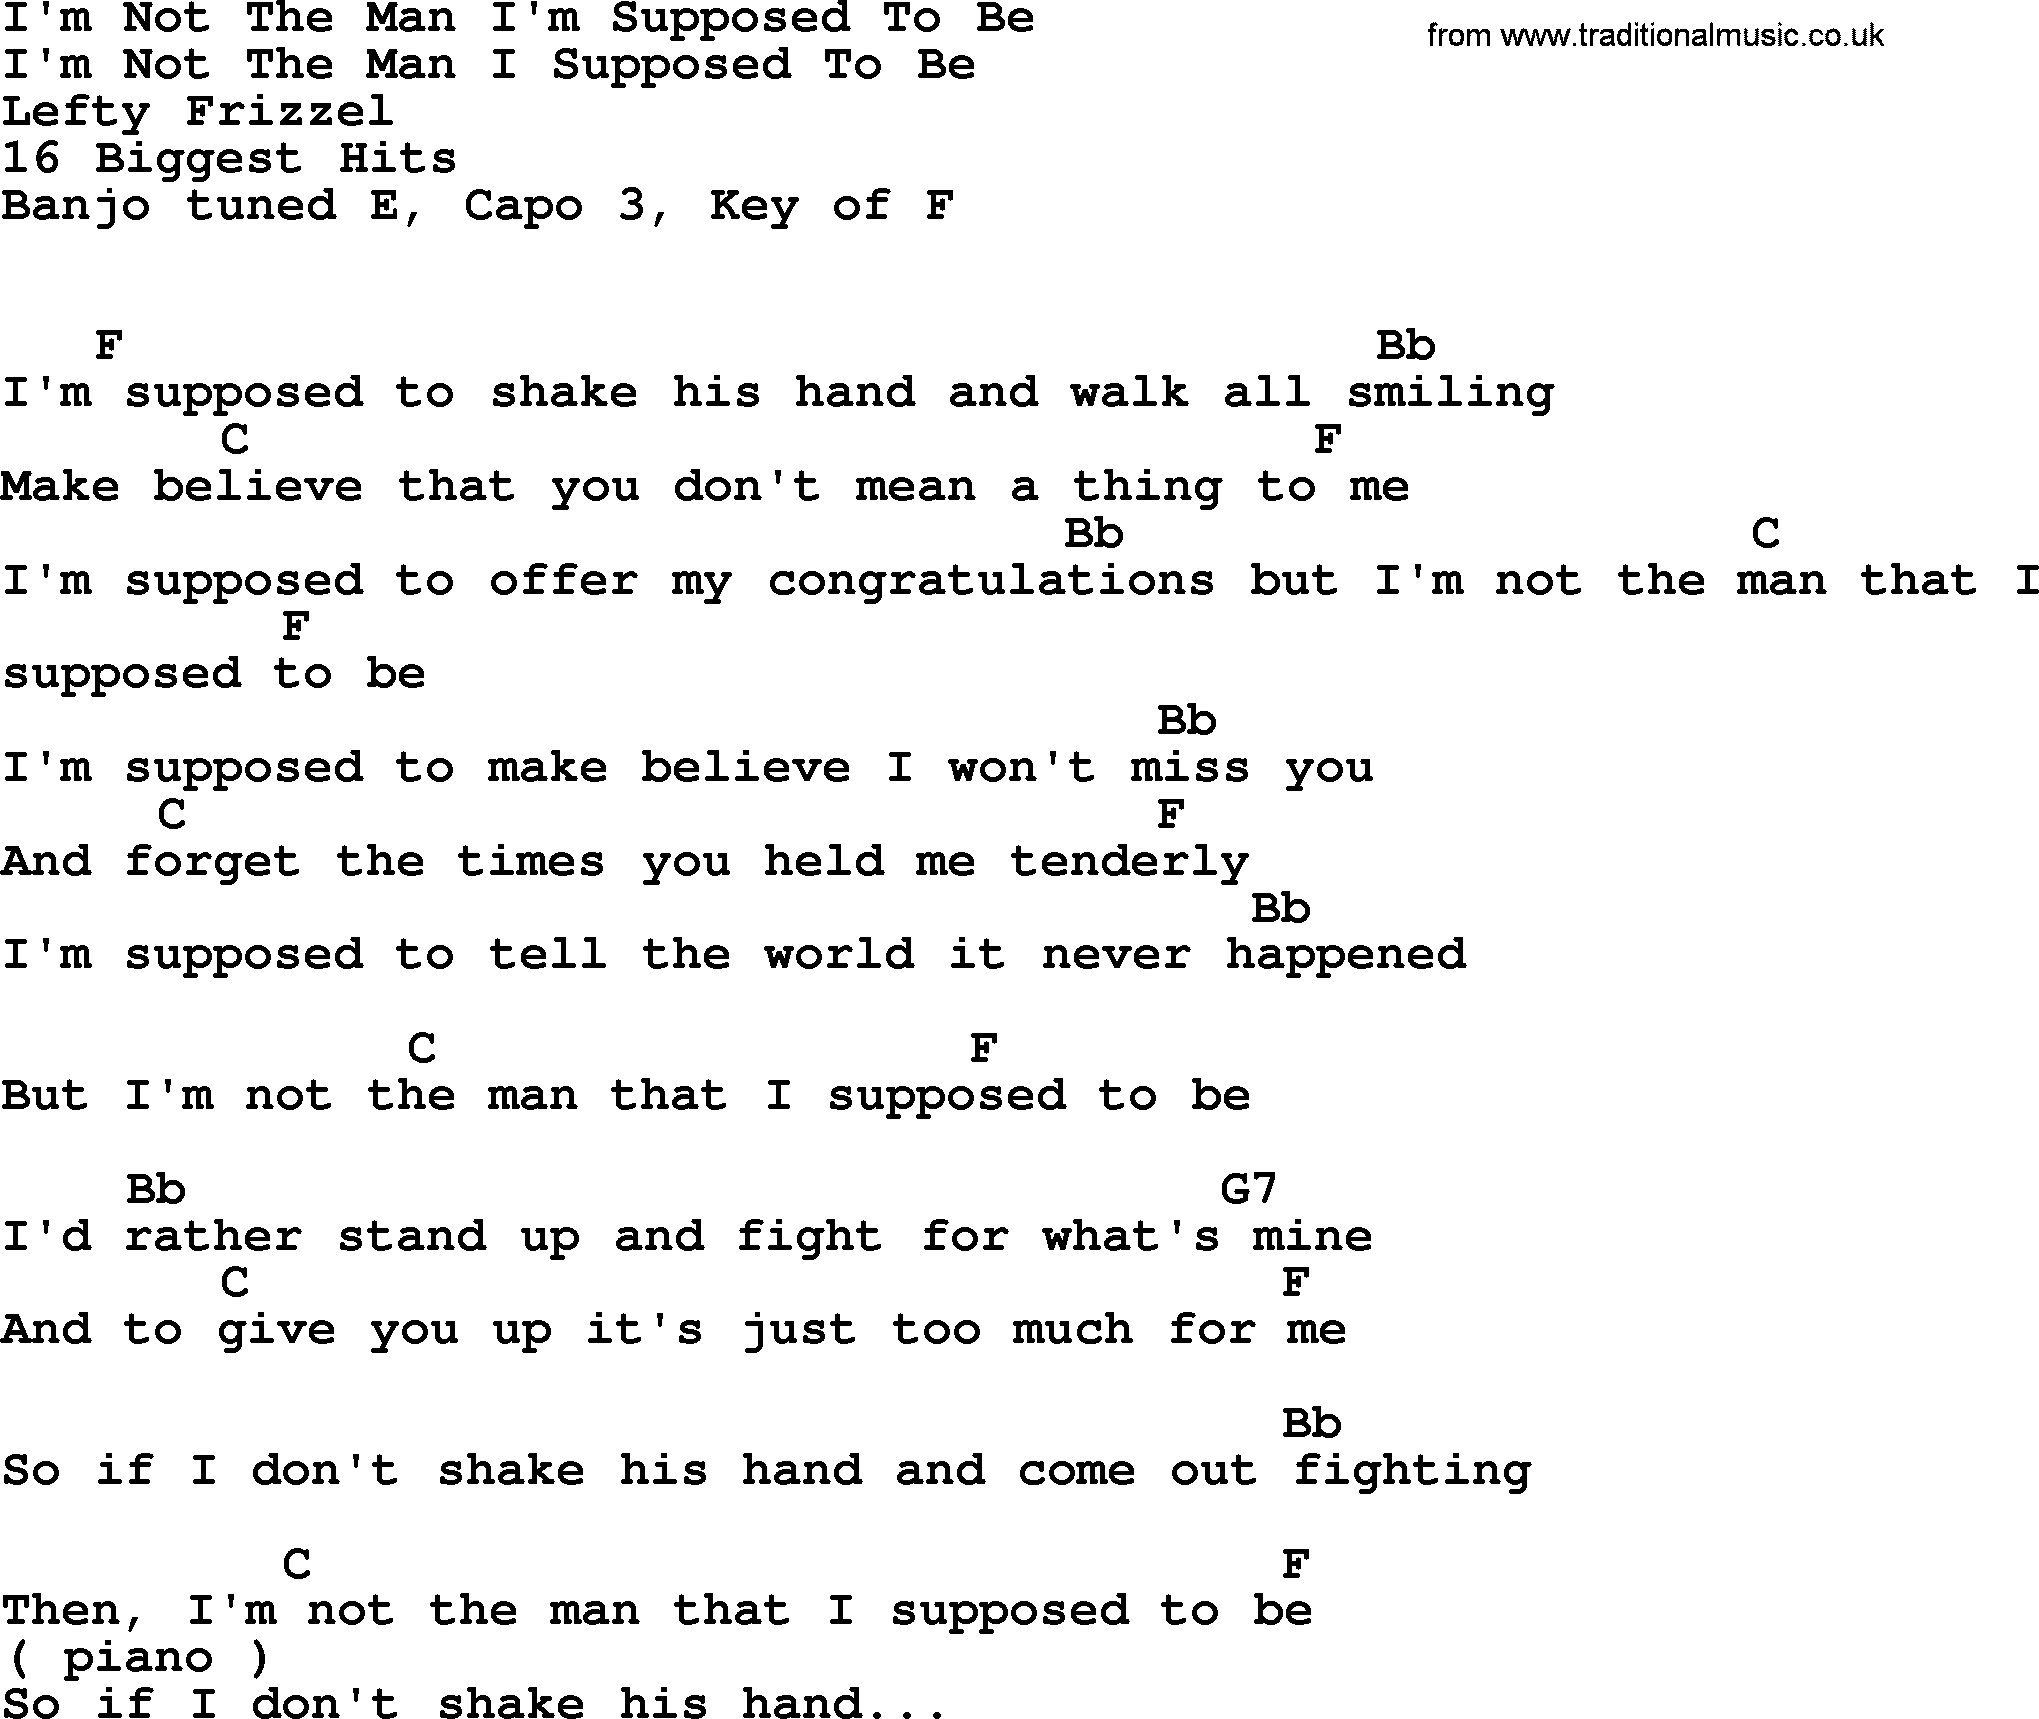 Bluegrass song: I'm Not The Man I'm Supposed To Be, lyrics and chords